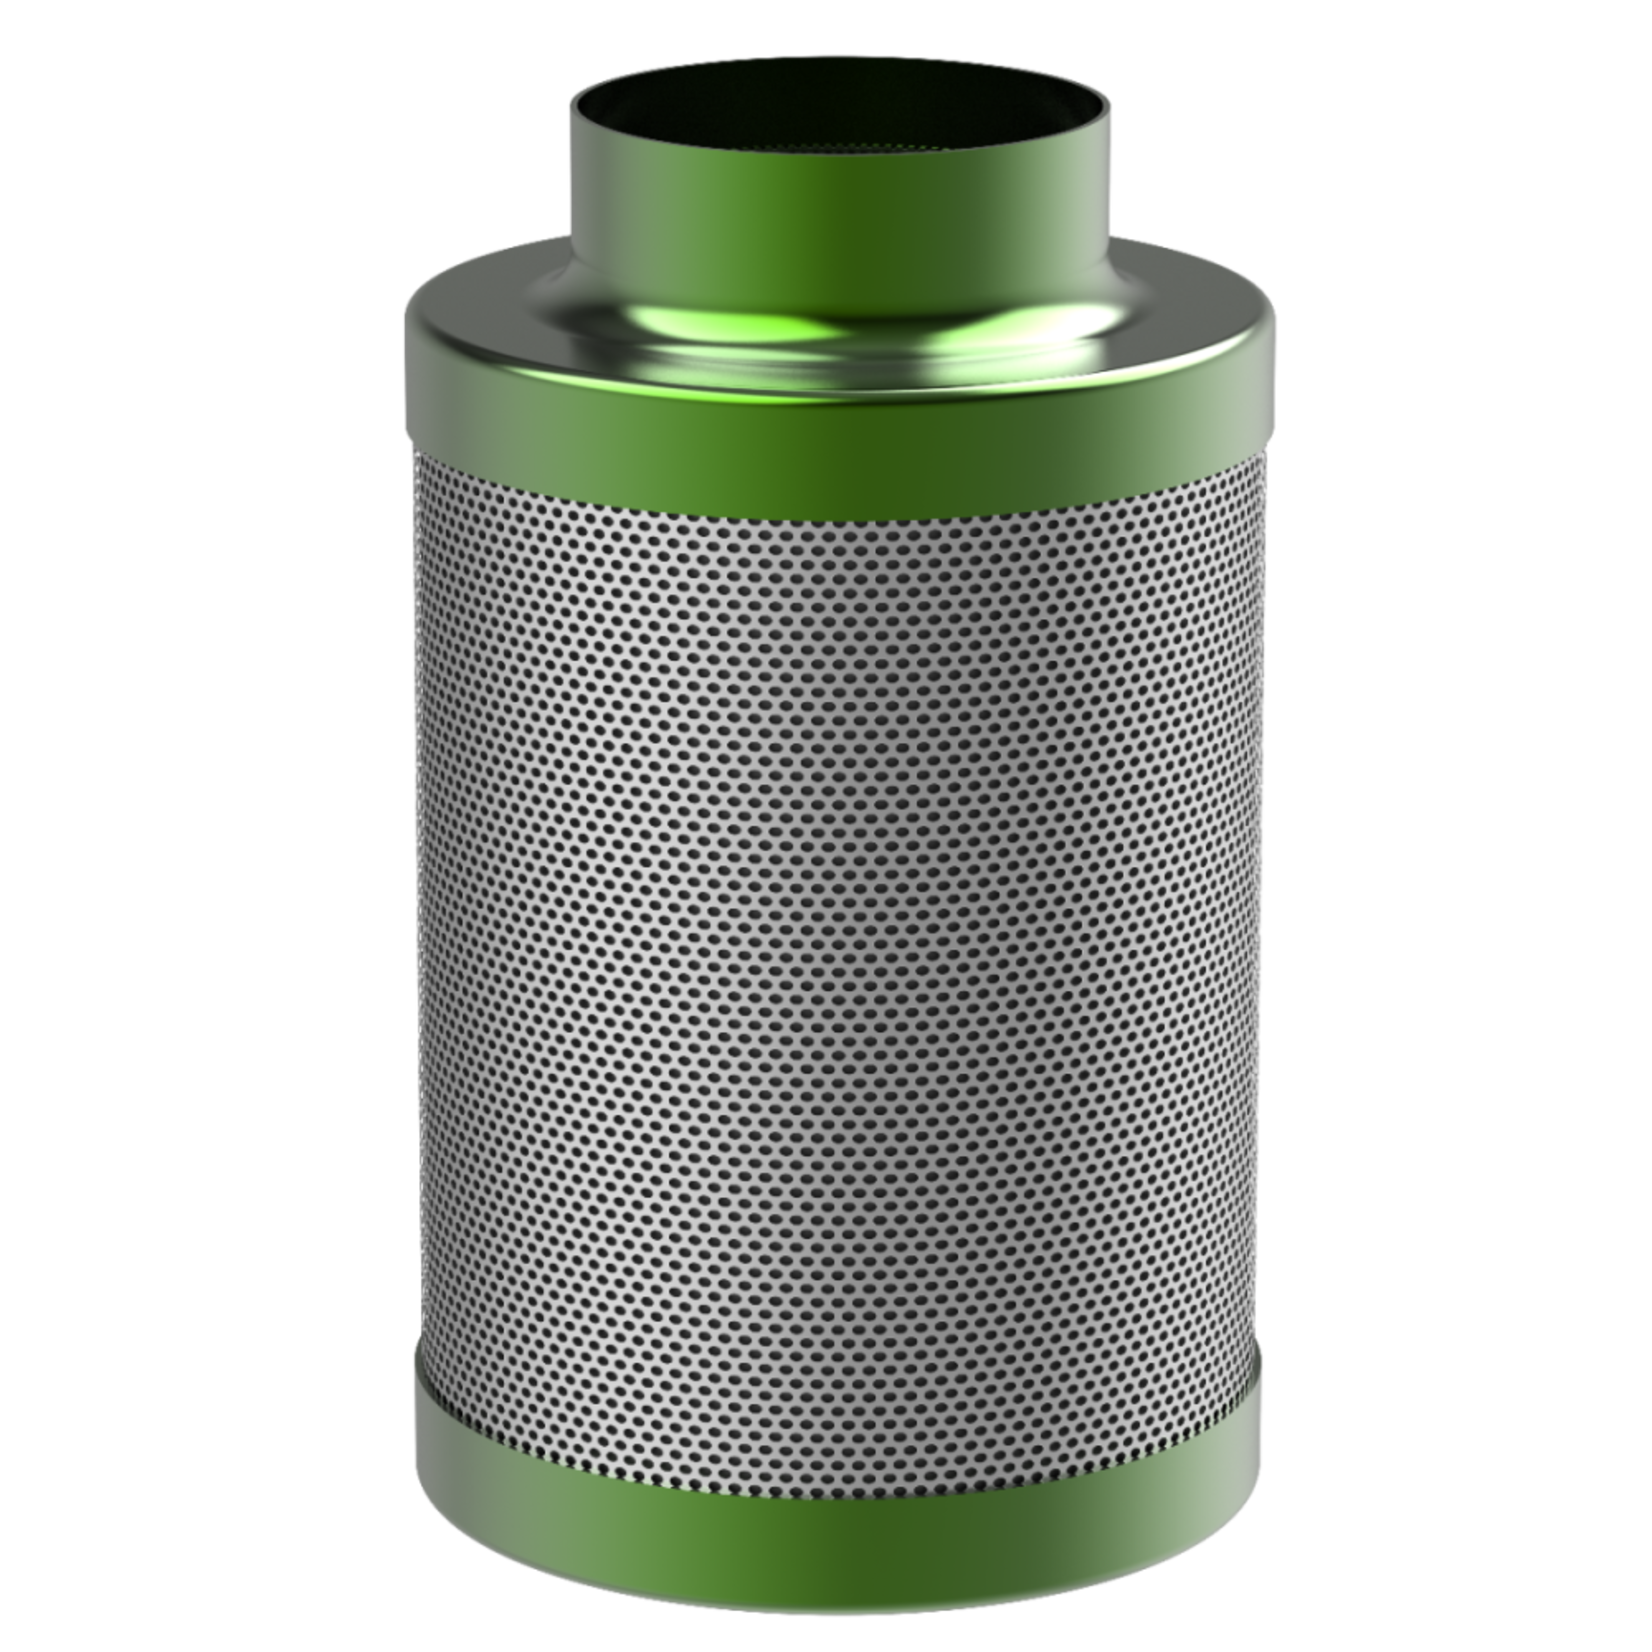 Flora Flex AIR CARBON FILTER 6" WITH PREMIUM AUSTRALIAN VIRGIN CHARCOAL, FOR INLINE DUCT FAN, ODOR CONTROL, HYDROPONICS, GROW ROOMS | 16"